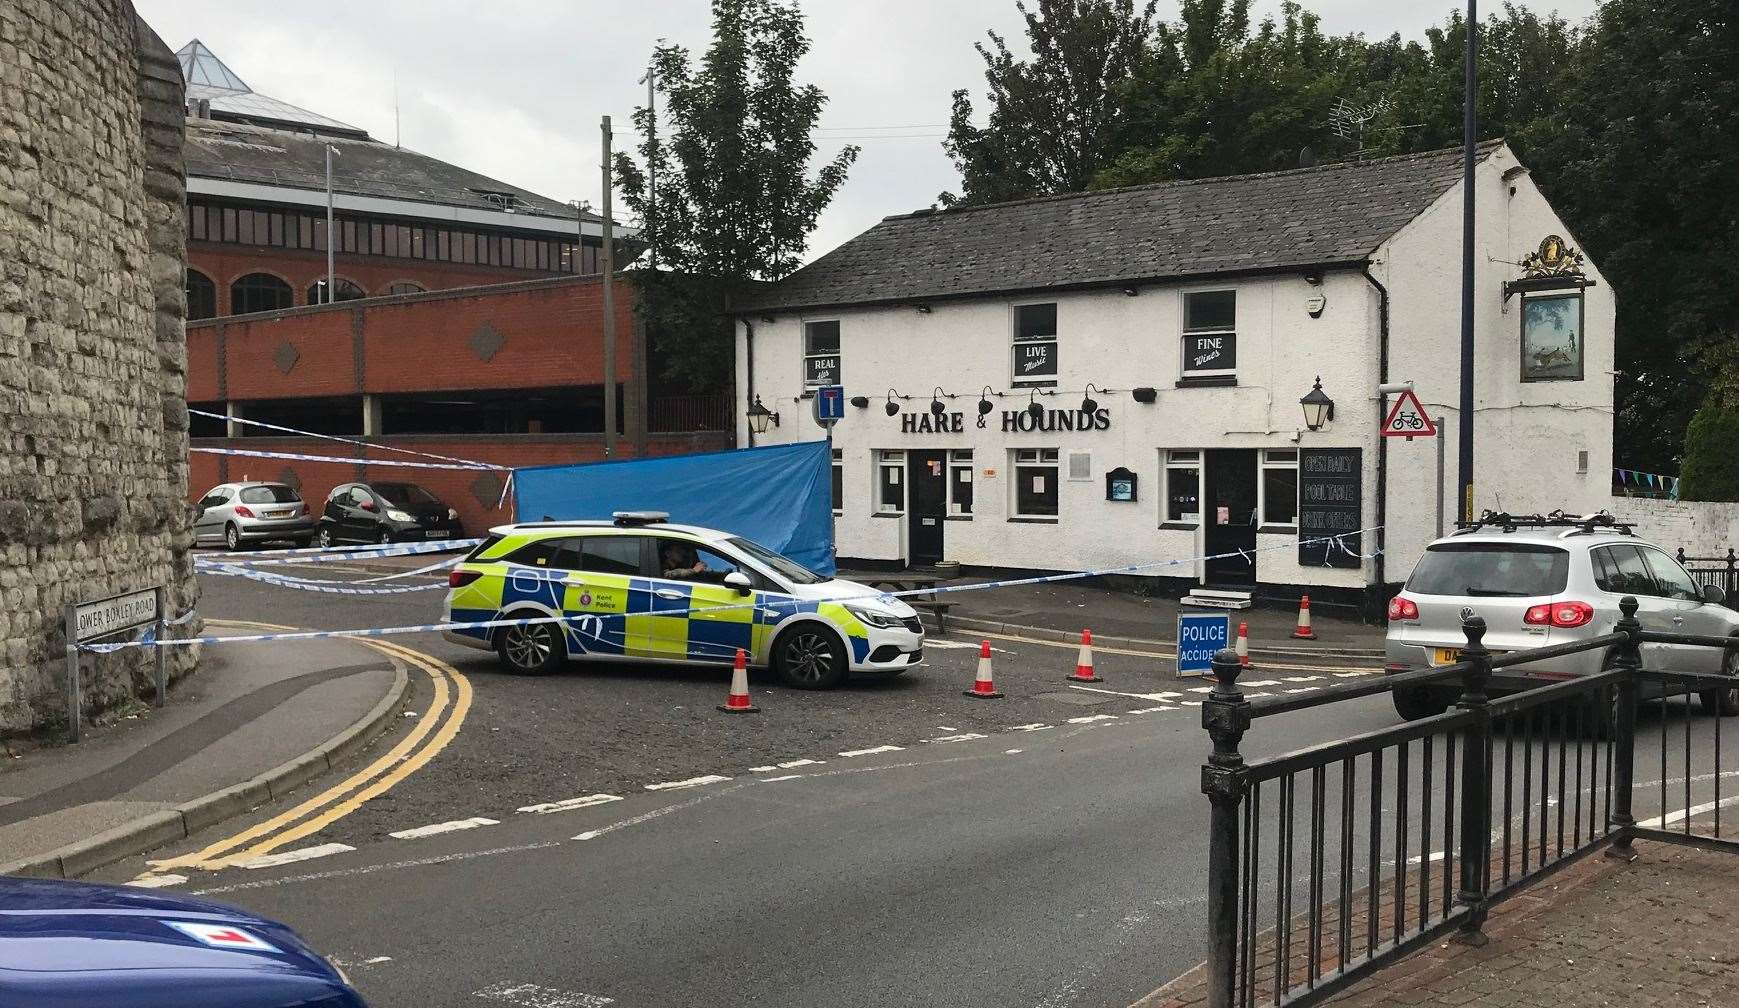 The Hare and Hounds pub cordoned off following the attack